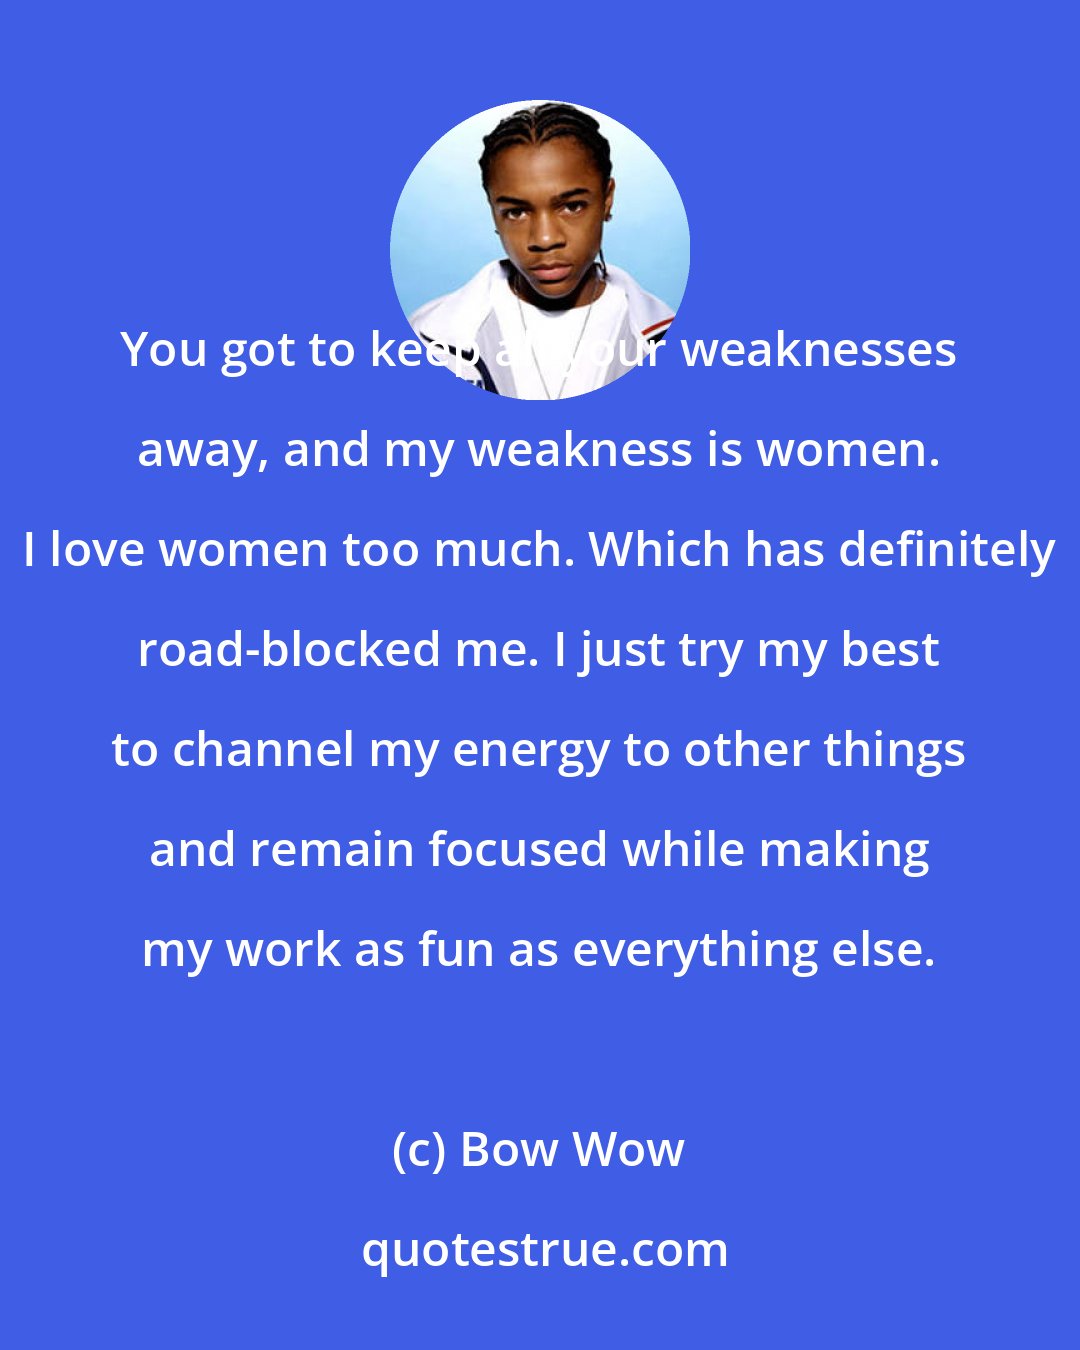 Bow Wow: You got to keep all your weaknesses away, and my weakness is women. I love women too much. Which has definitely road-blocked me. I just try my best to channel my energy to other things and remain focused while making my work as fun as everything else.